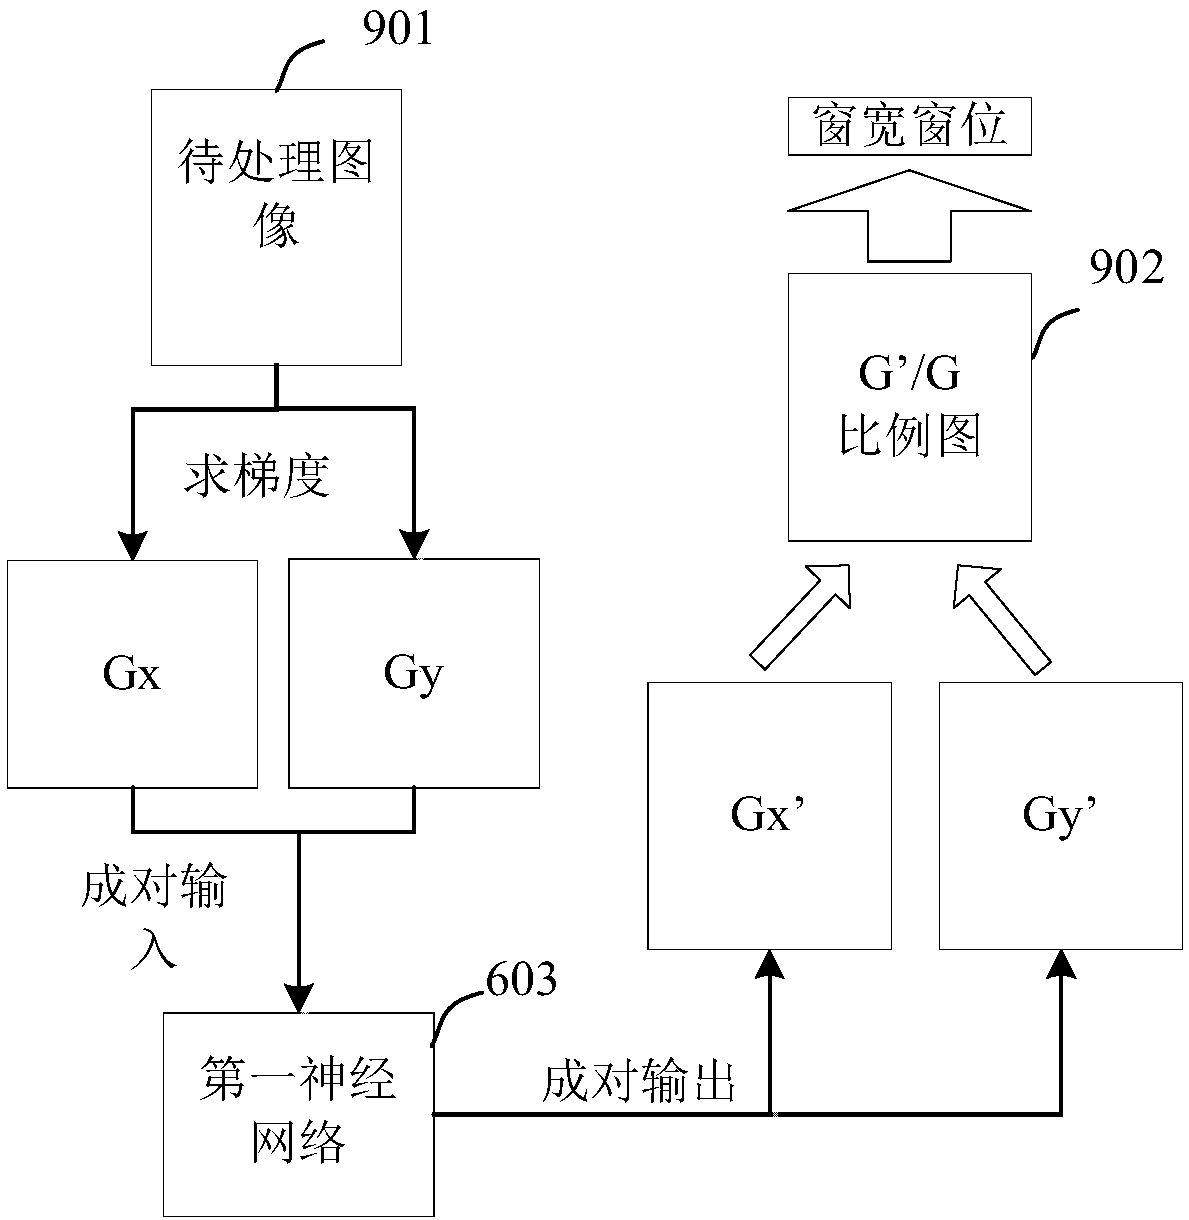 Medical image data processing method, device and computer readable storage medium